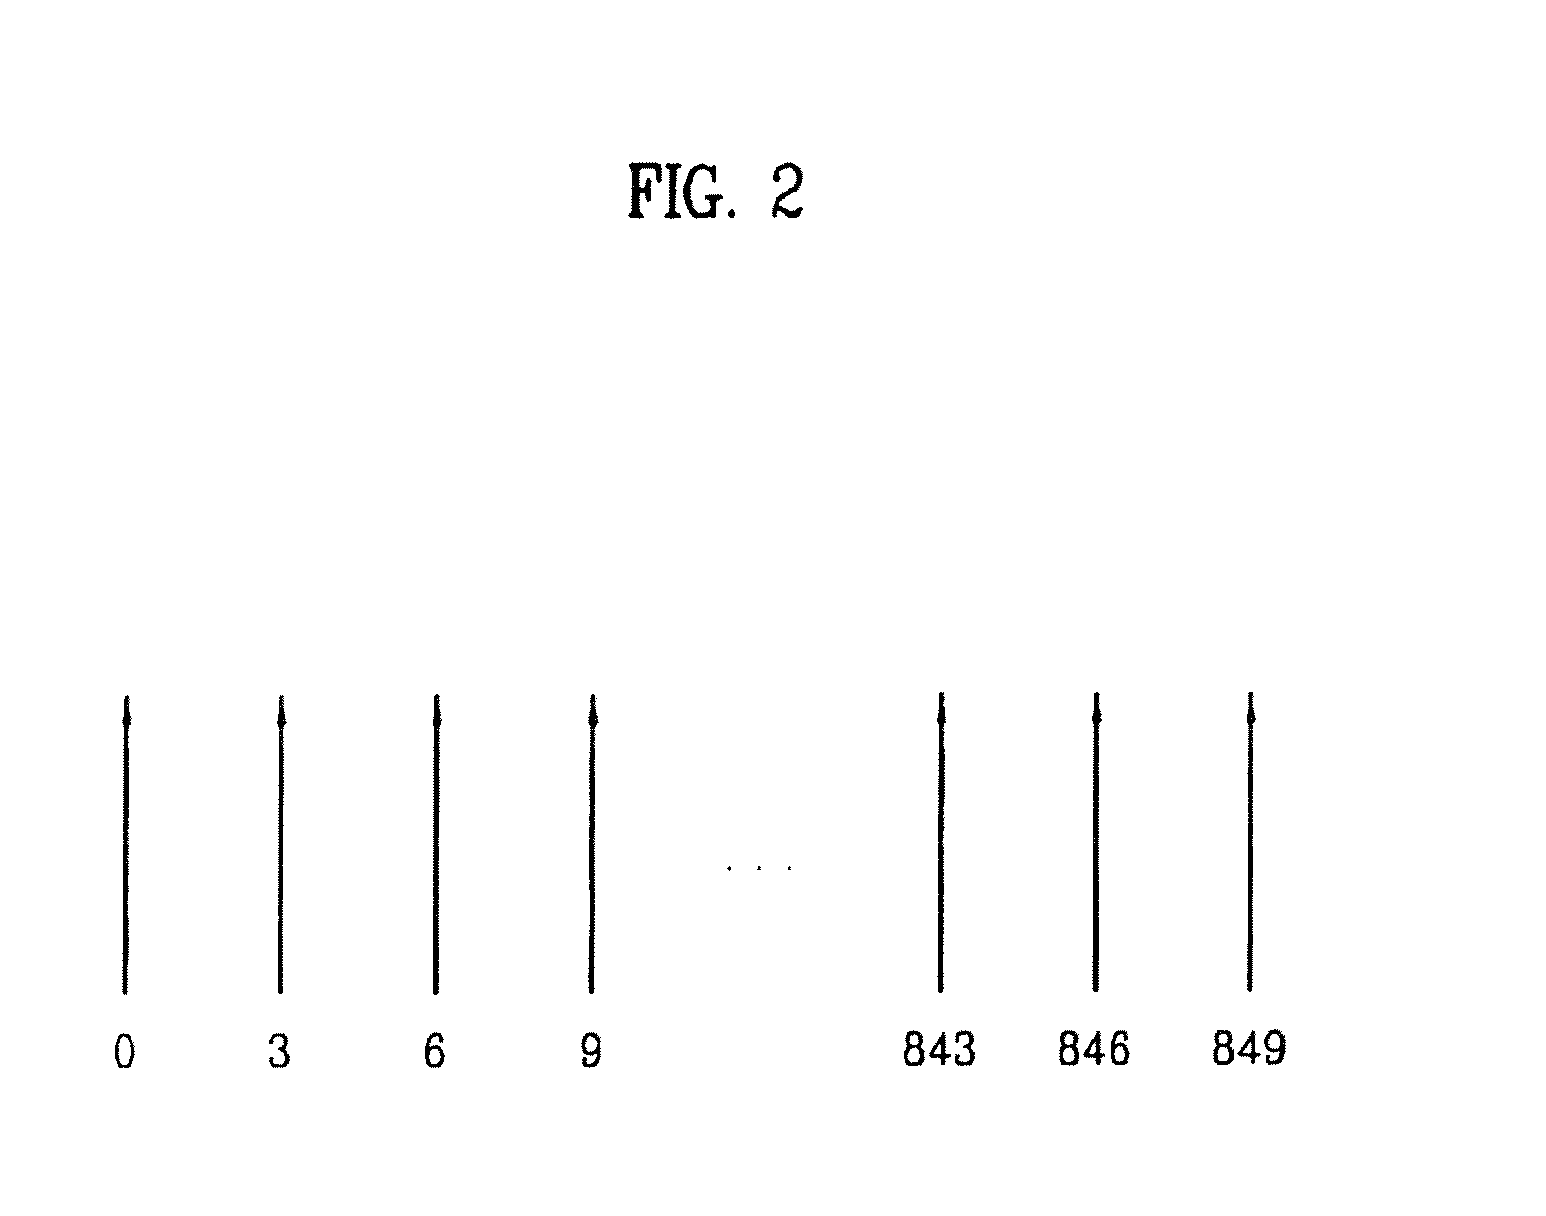 Sequence generating method for efficient detection and method for transmitting and receiving signals using the same